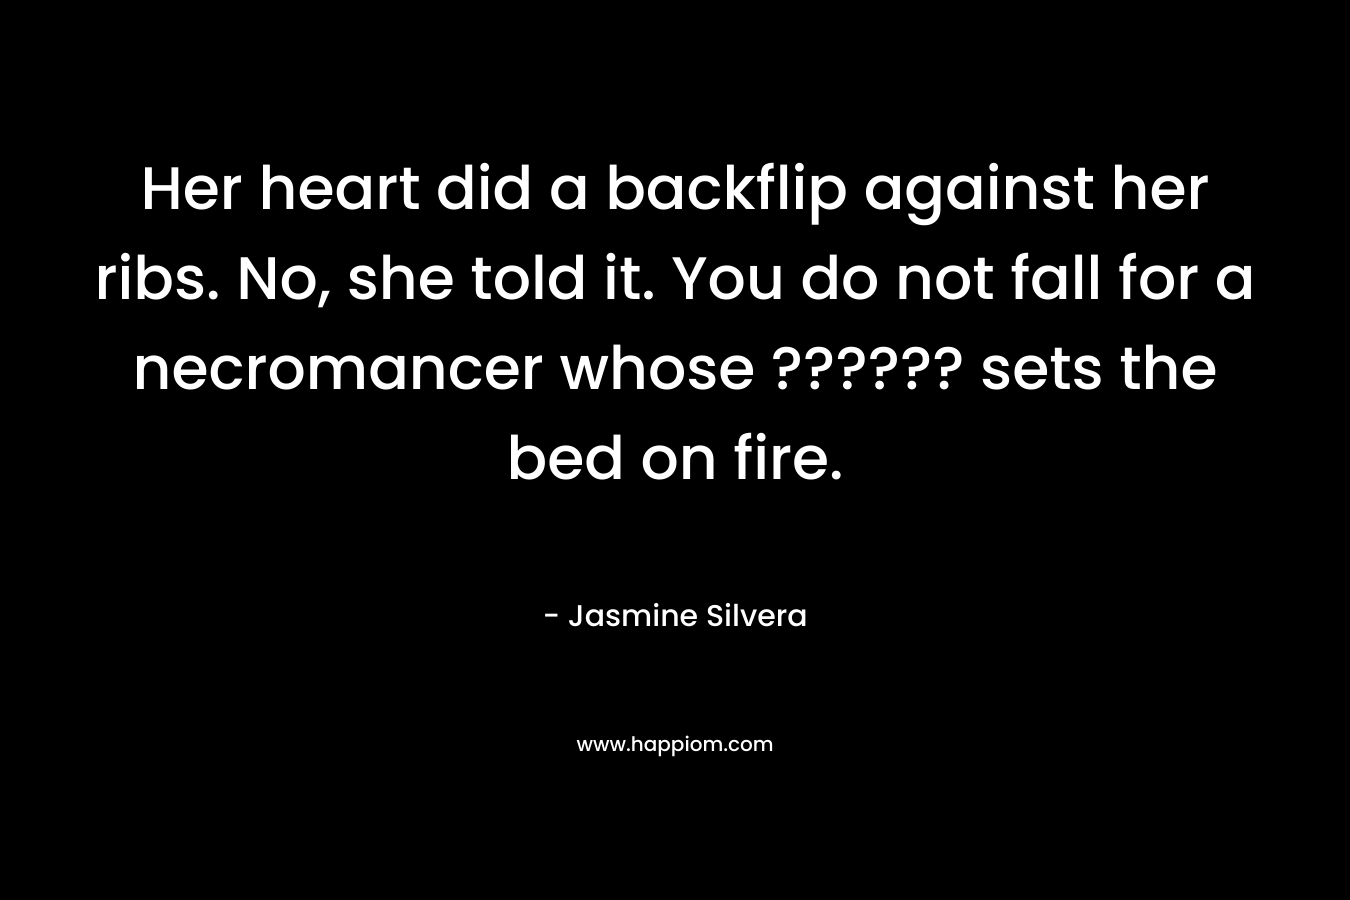 Her heart did a backflip against her ribs. No, she told it. You do not fall for a necromancer whose ?????? sets the bed on fire.